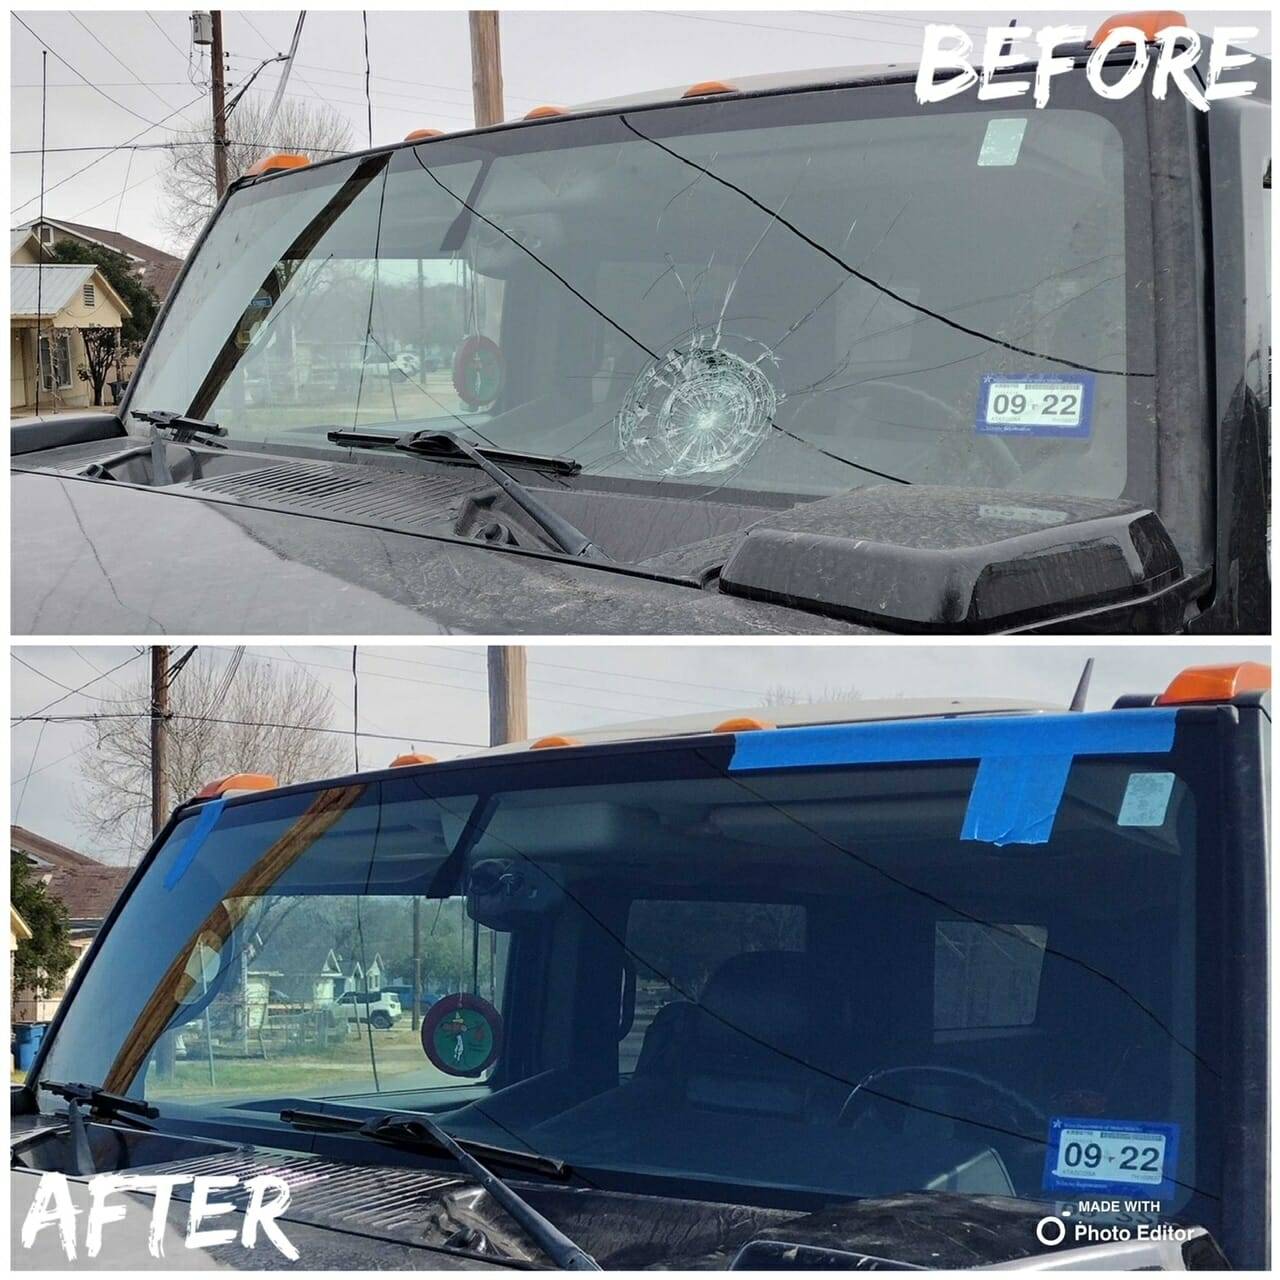 A split image displaying the before-and-after state of the front windshield on a 2010 Hummer H3 pickup truck at The Riverwalk, San Antonio, Texas. The top half shows the broken windshield due to an accident, while the bottom half highlights the professionally replaced windshield after a home auto glass appointment.